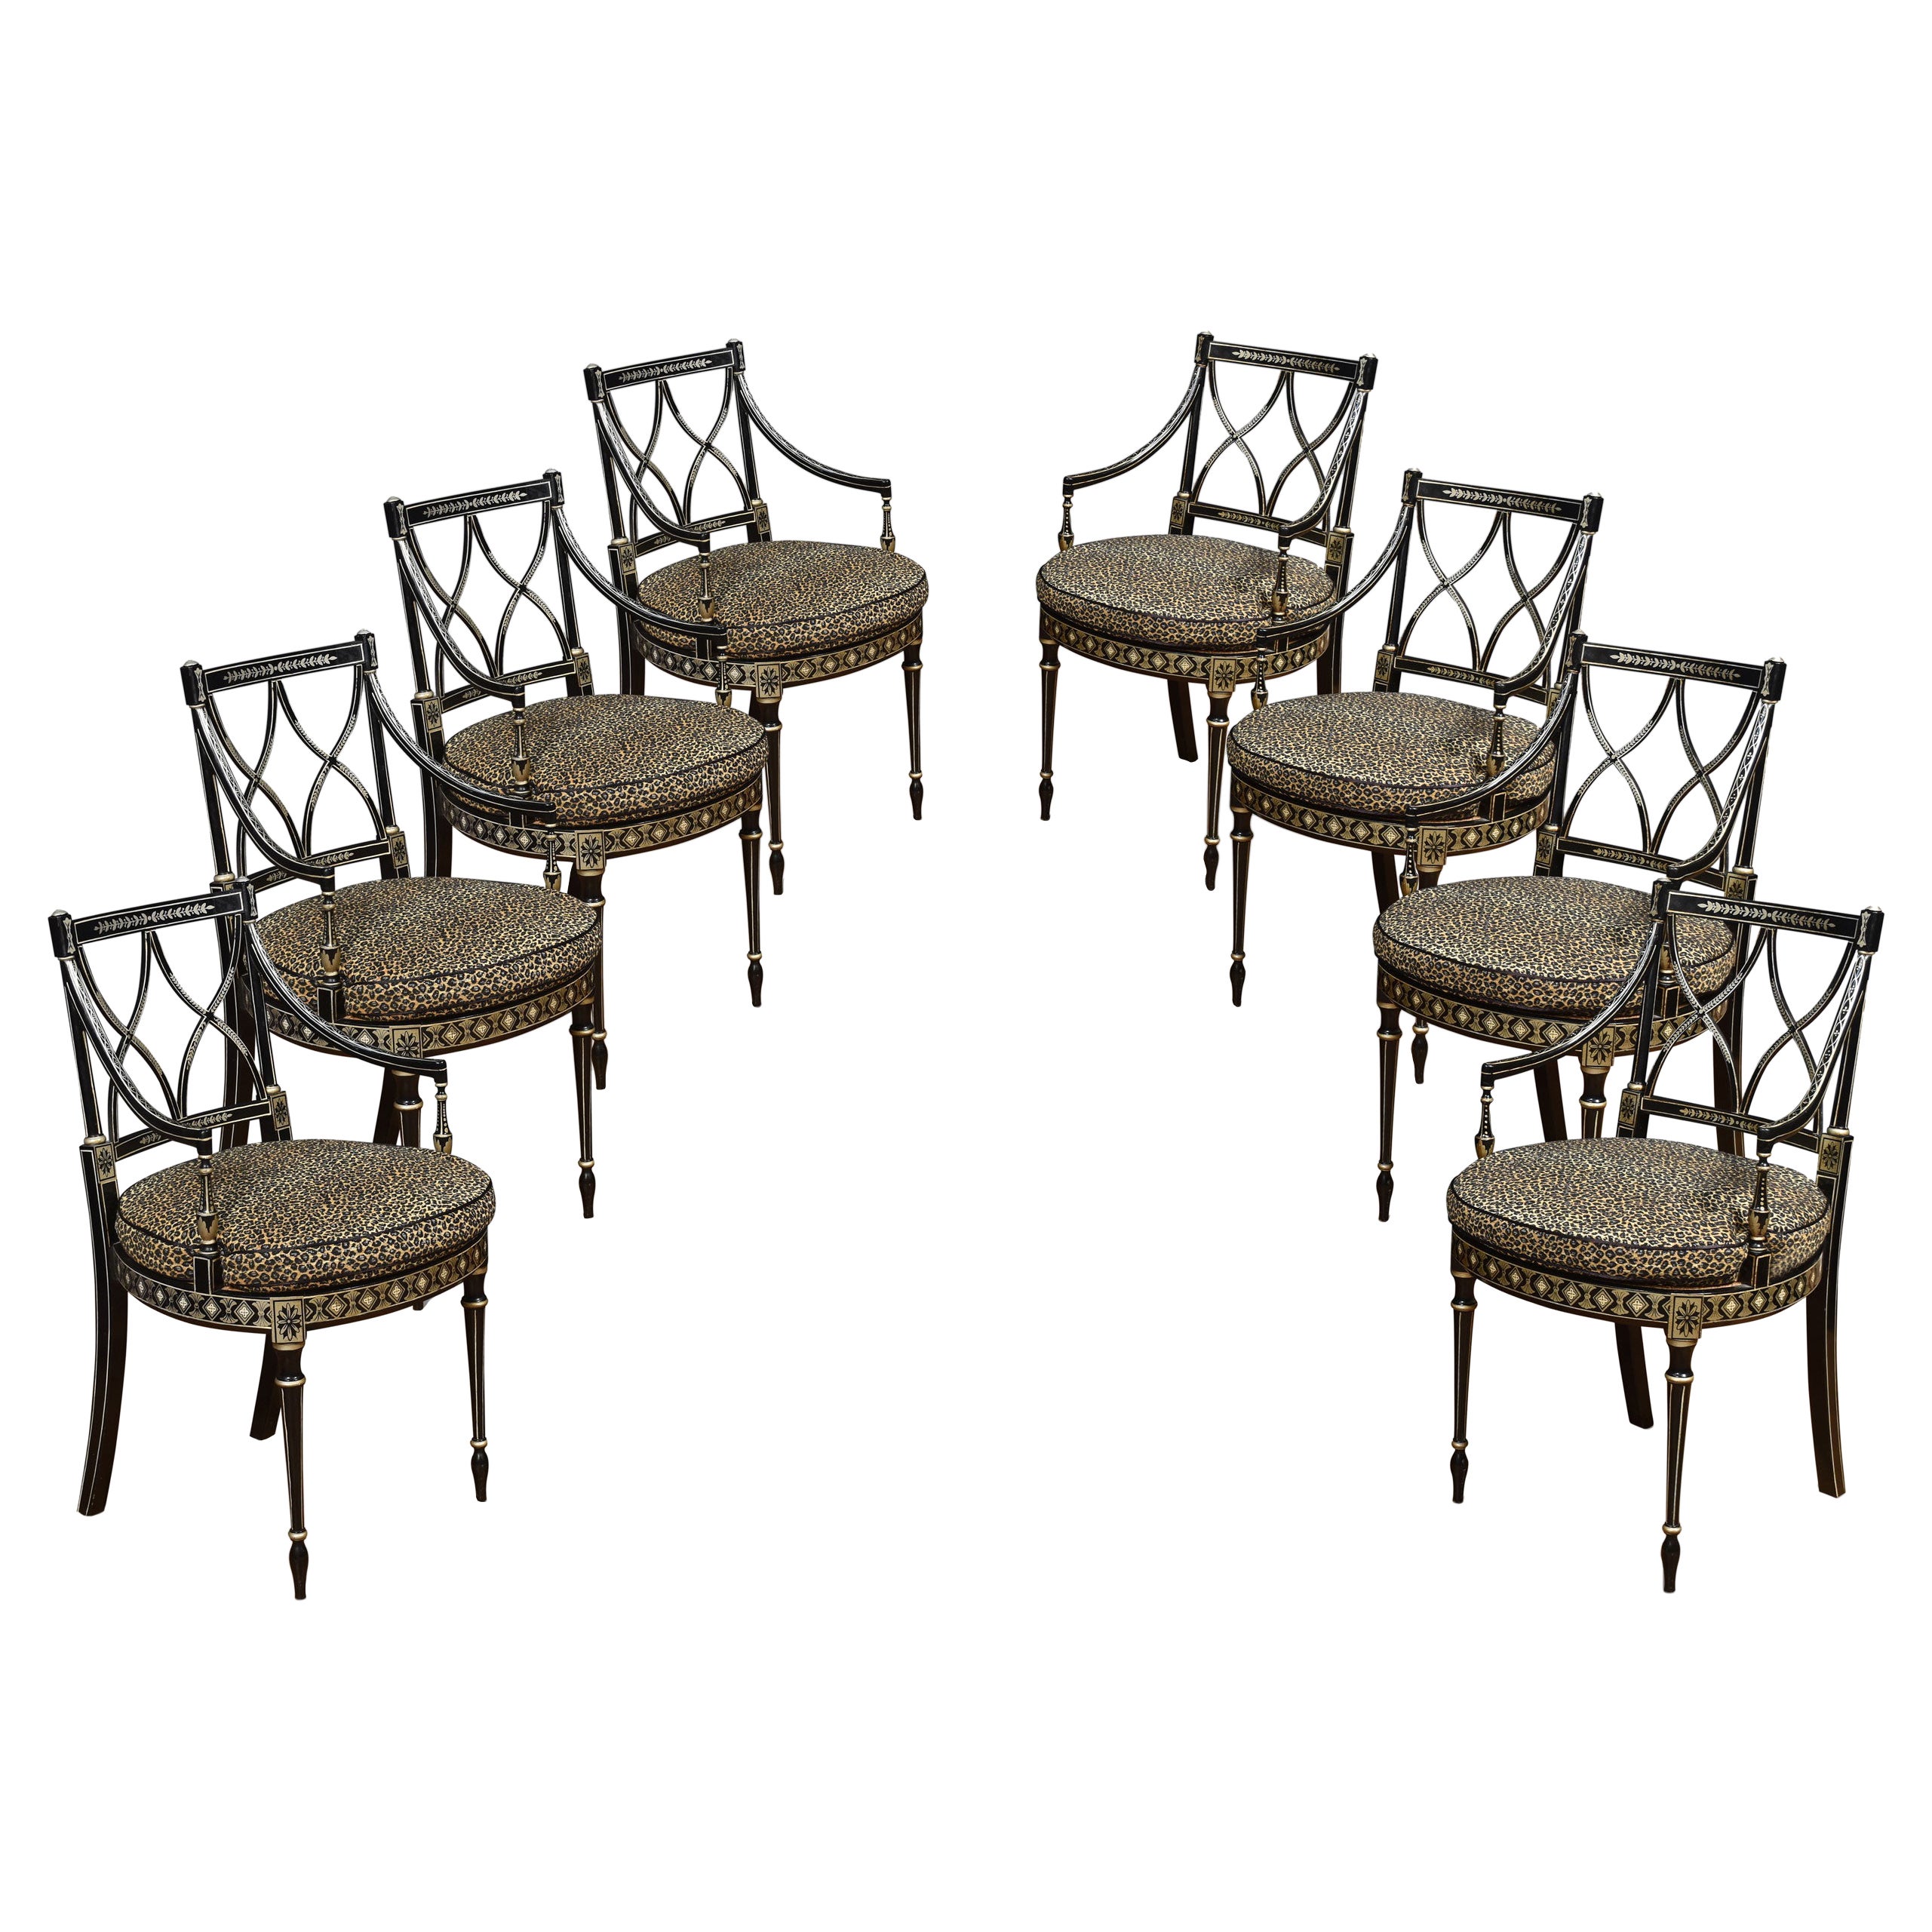 Set of Eight Regency Style Dining Chairs